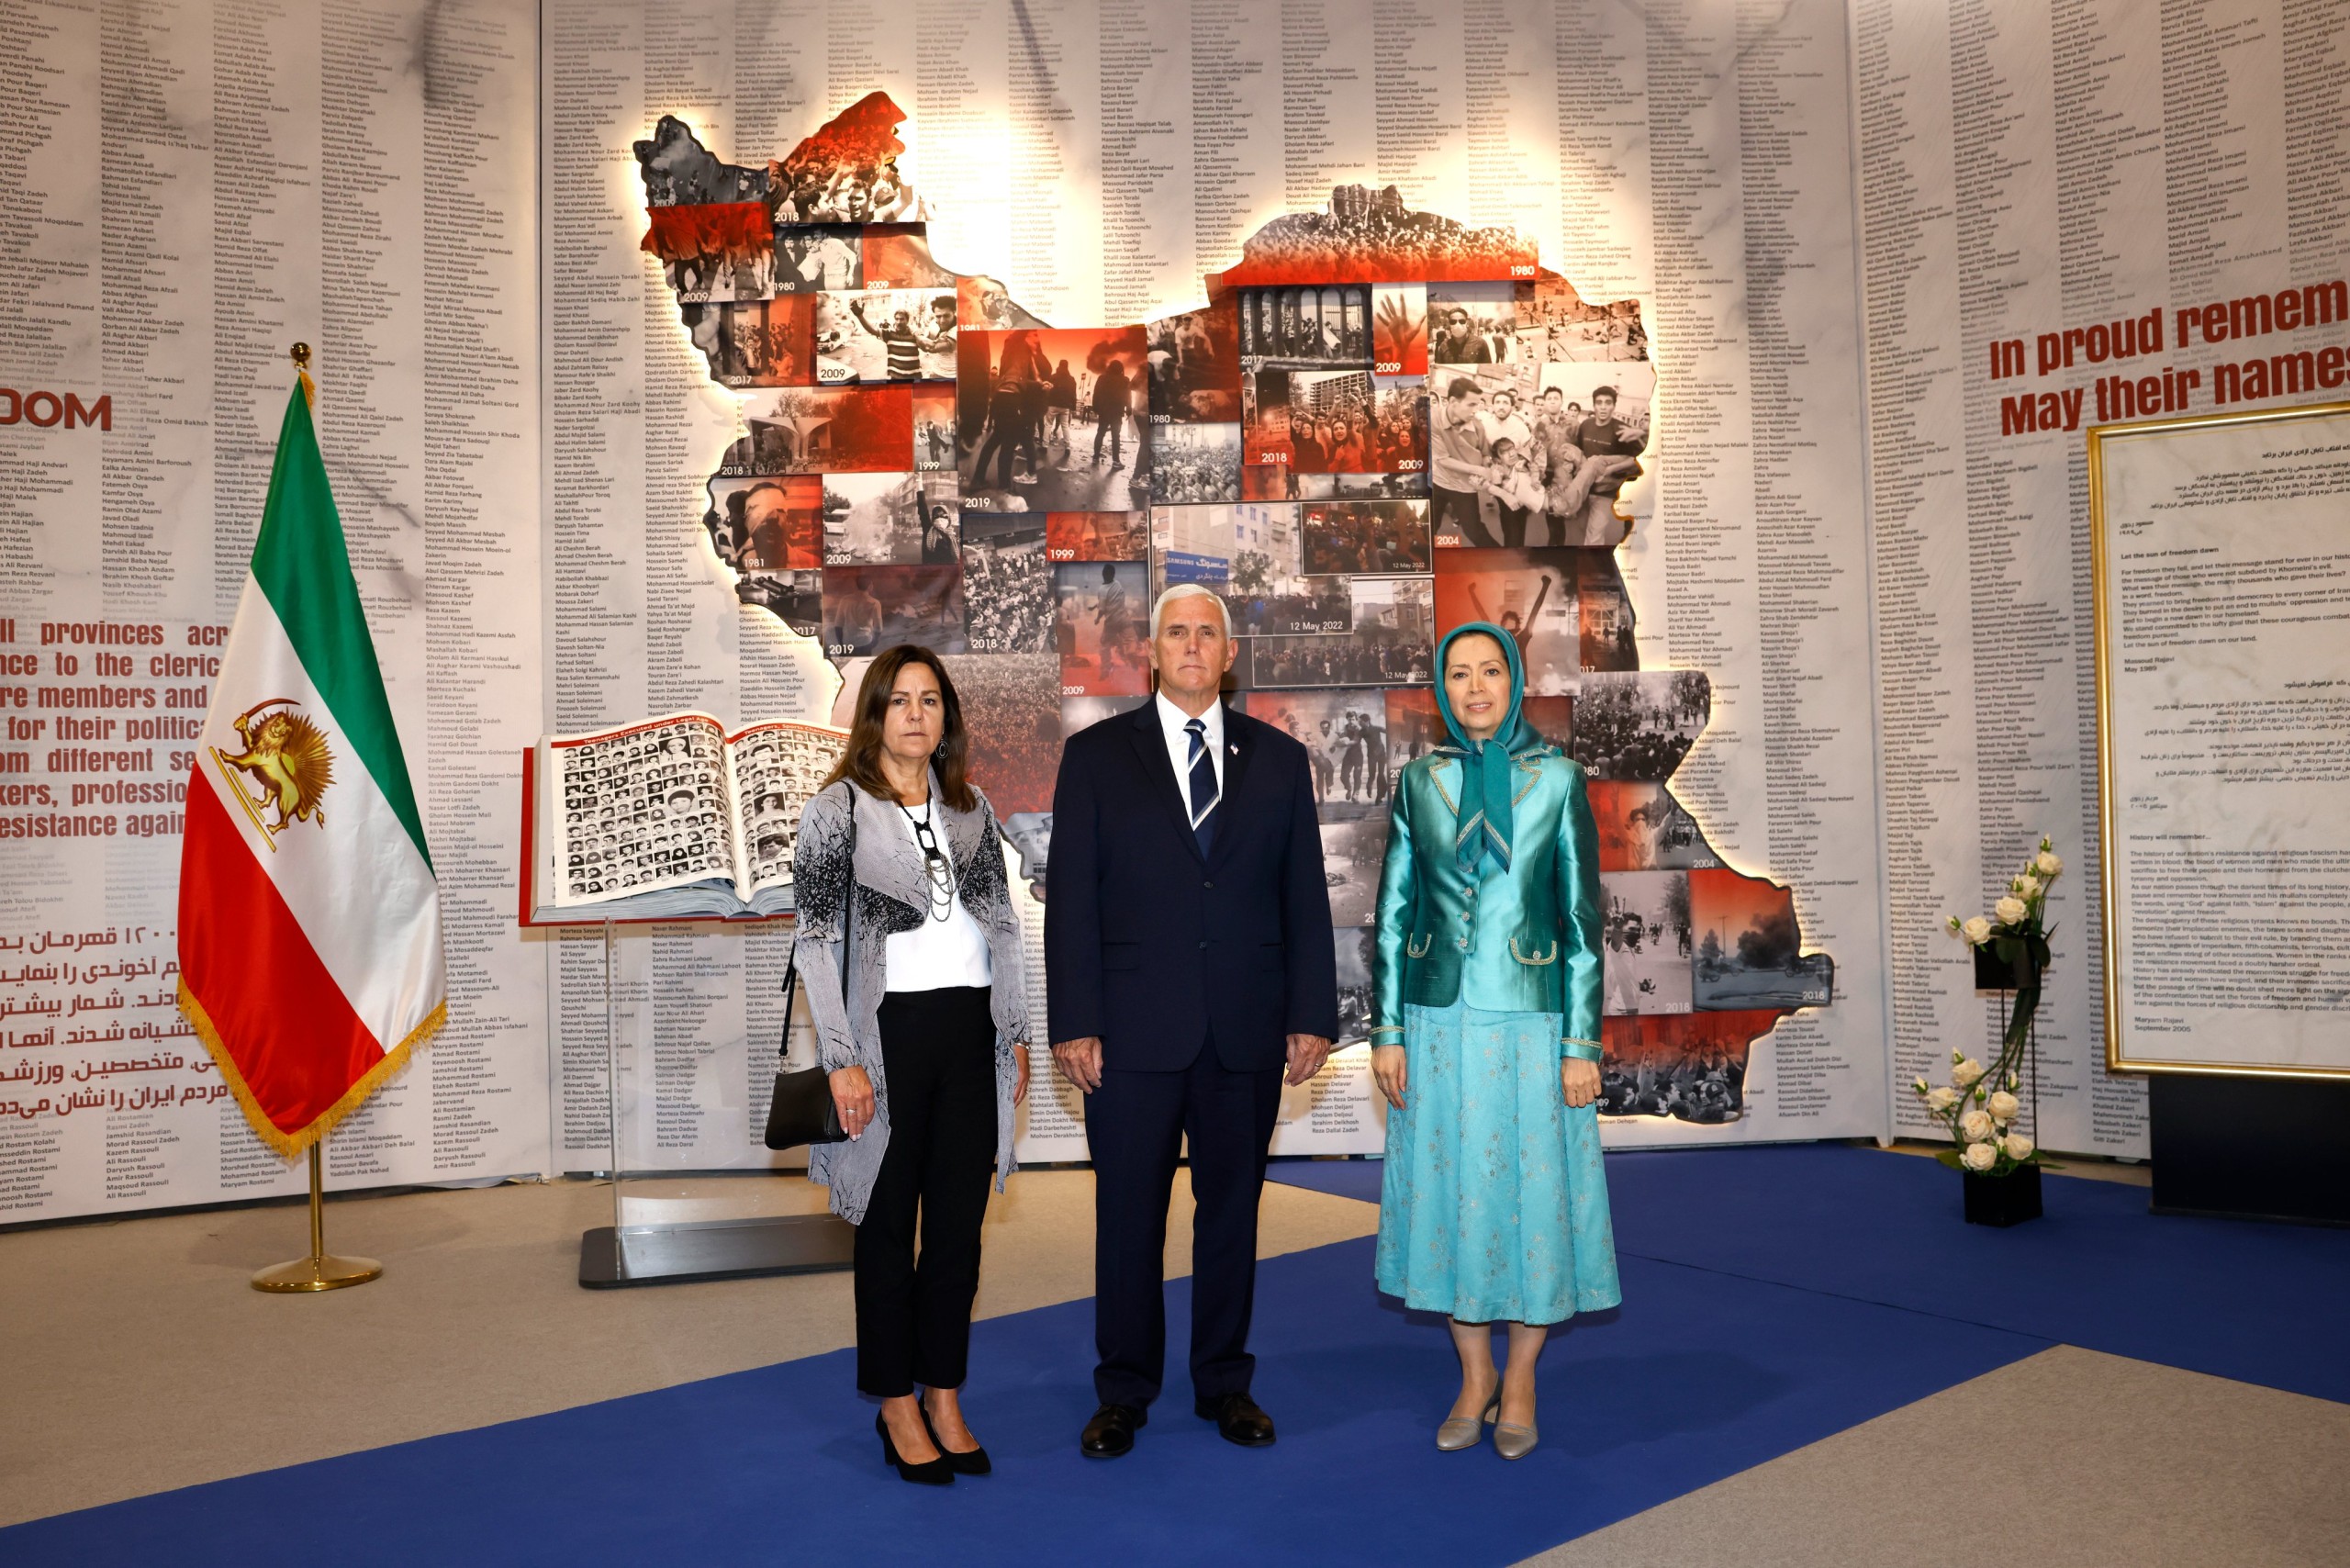 Former U.S. VP Mike Pence visits Iranian Resistance President-elect Maryam Rajavi in Albania, showing his support of a free Iran.